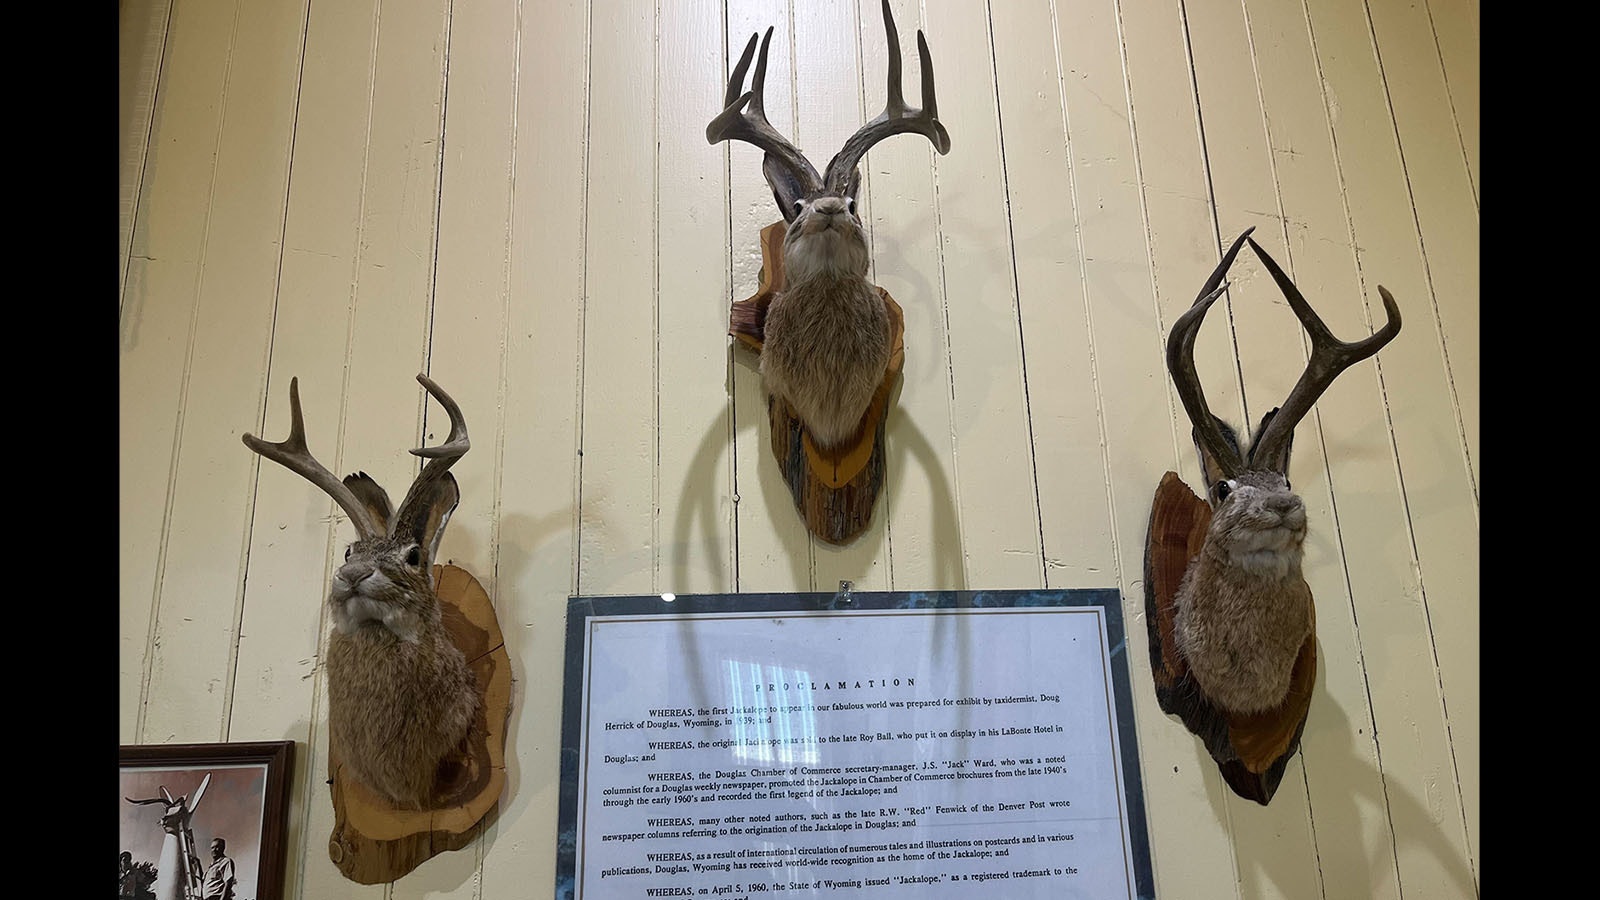 A trio of jackalopes are mounted on a wall at the Douglas Railroad Museum and Visitor Center over a proclamation canonizing taxidermist Doug Herrick of Douglas for creating the first jackalope in 1939.